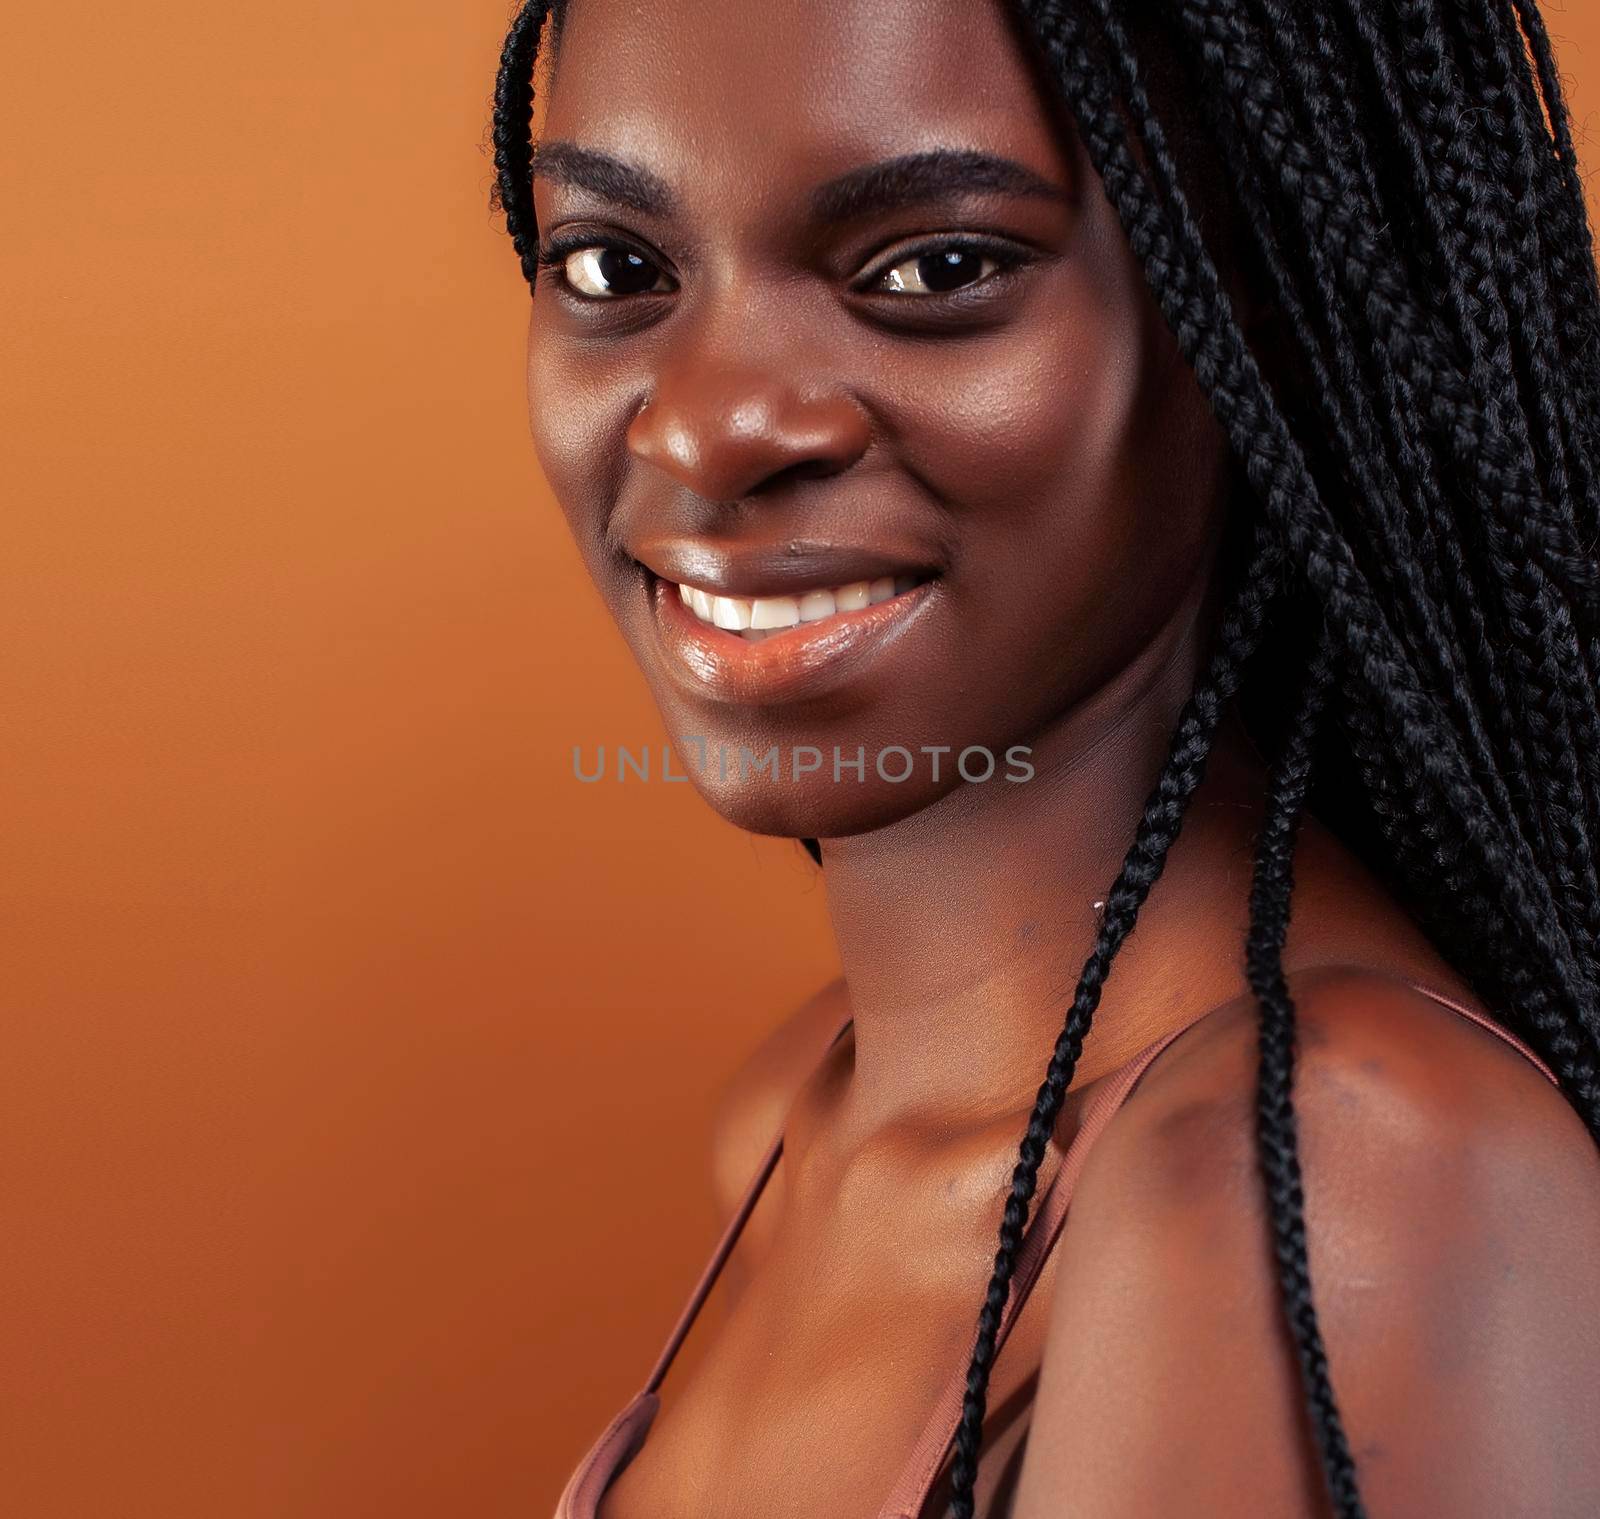 pretty young african american woman with braids posing cheerful gesturing on brown background, lifestyle people concept close up